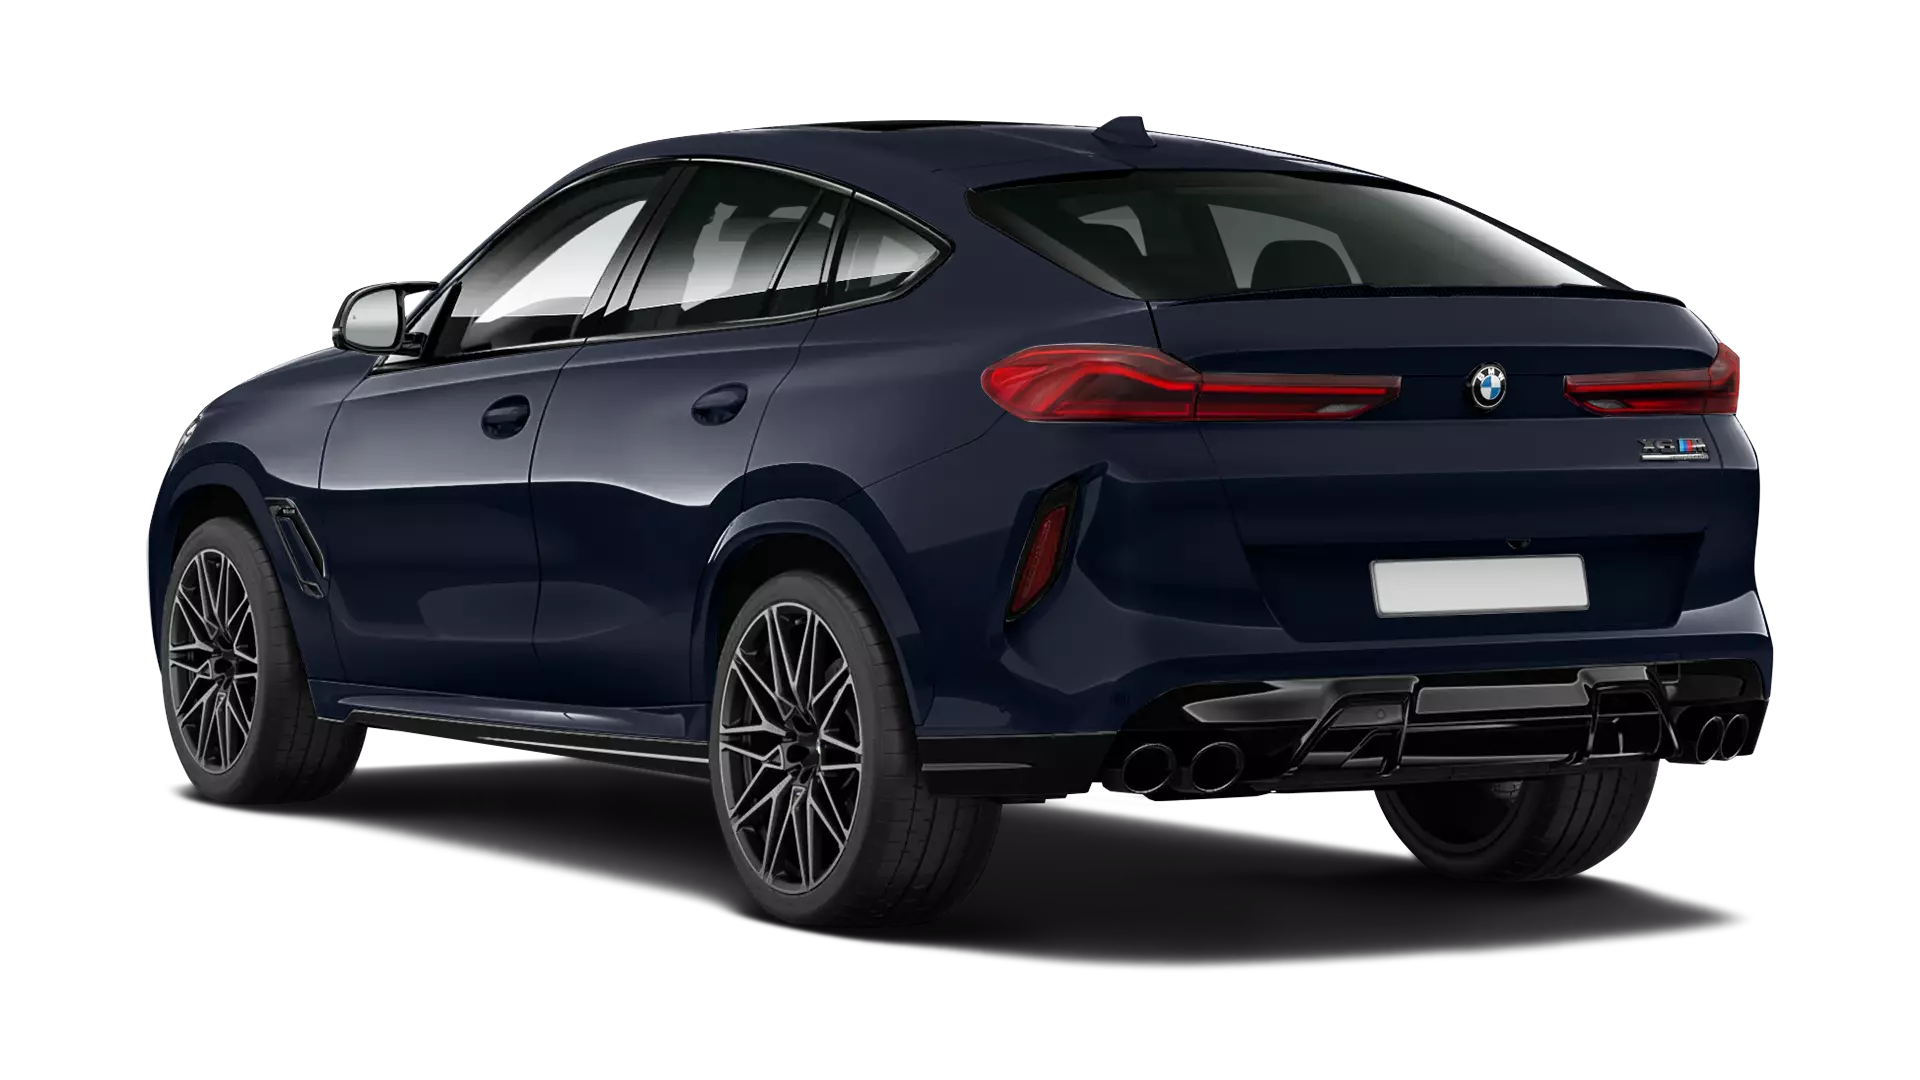 BMW X6M F96 stock rear view in Carbon Black color